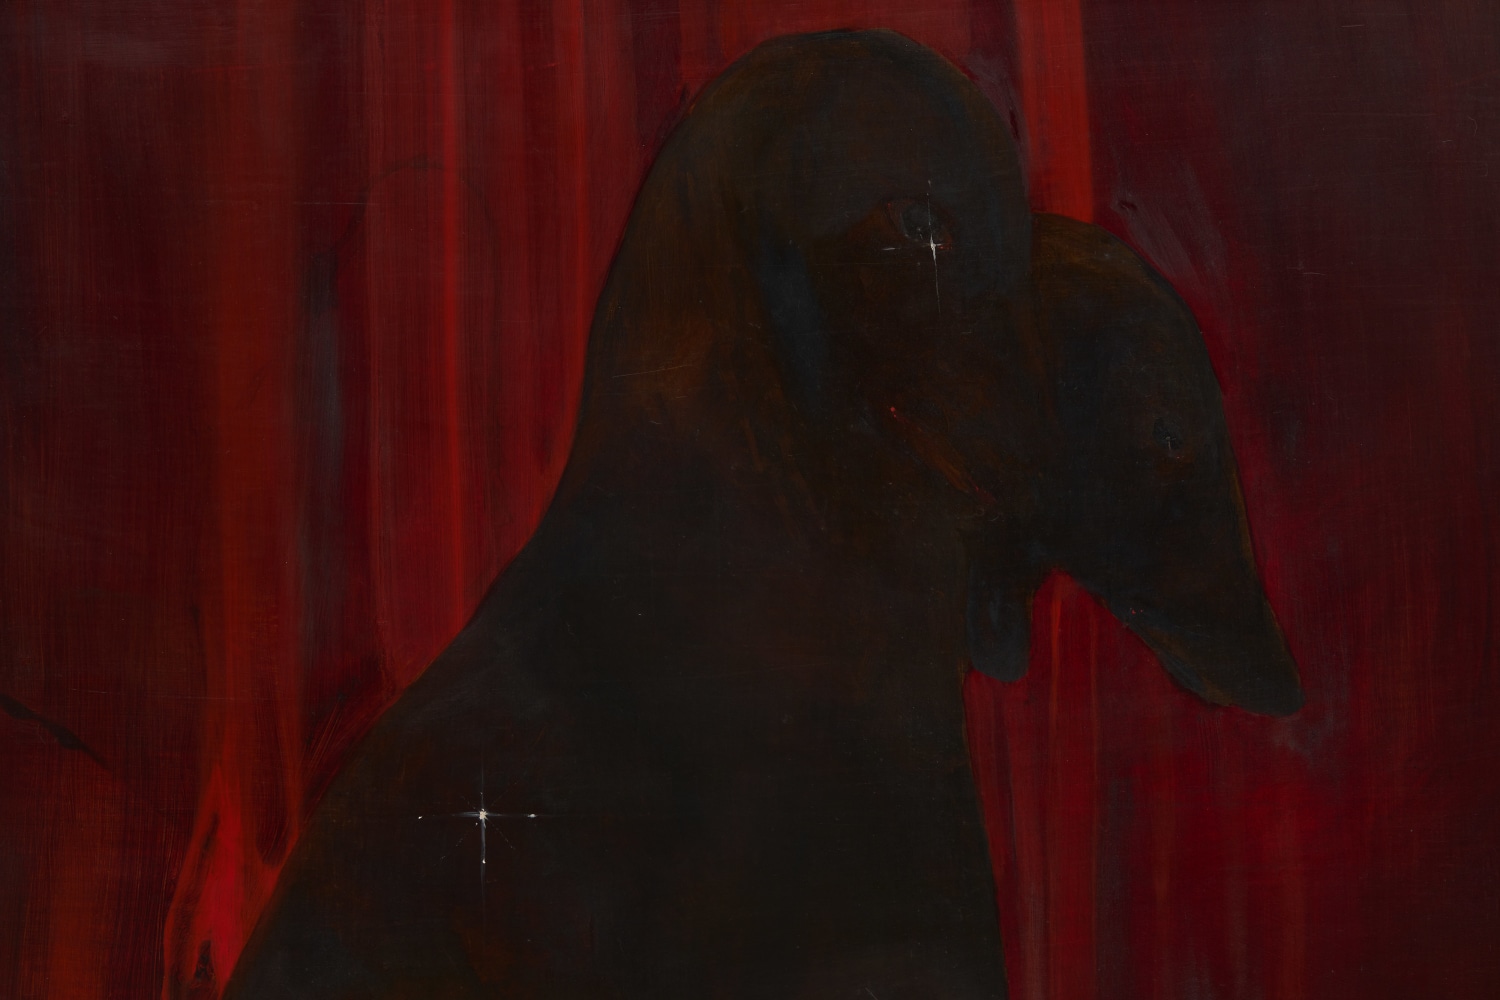 Rae Klein

Double Dog and Red Curtain, 2022

(detail view)